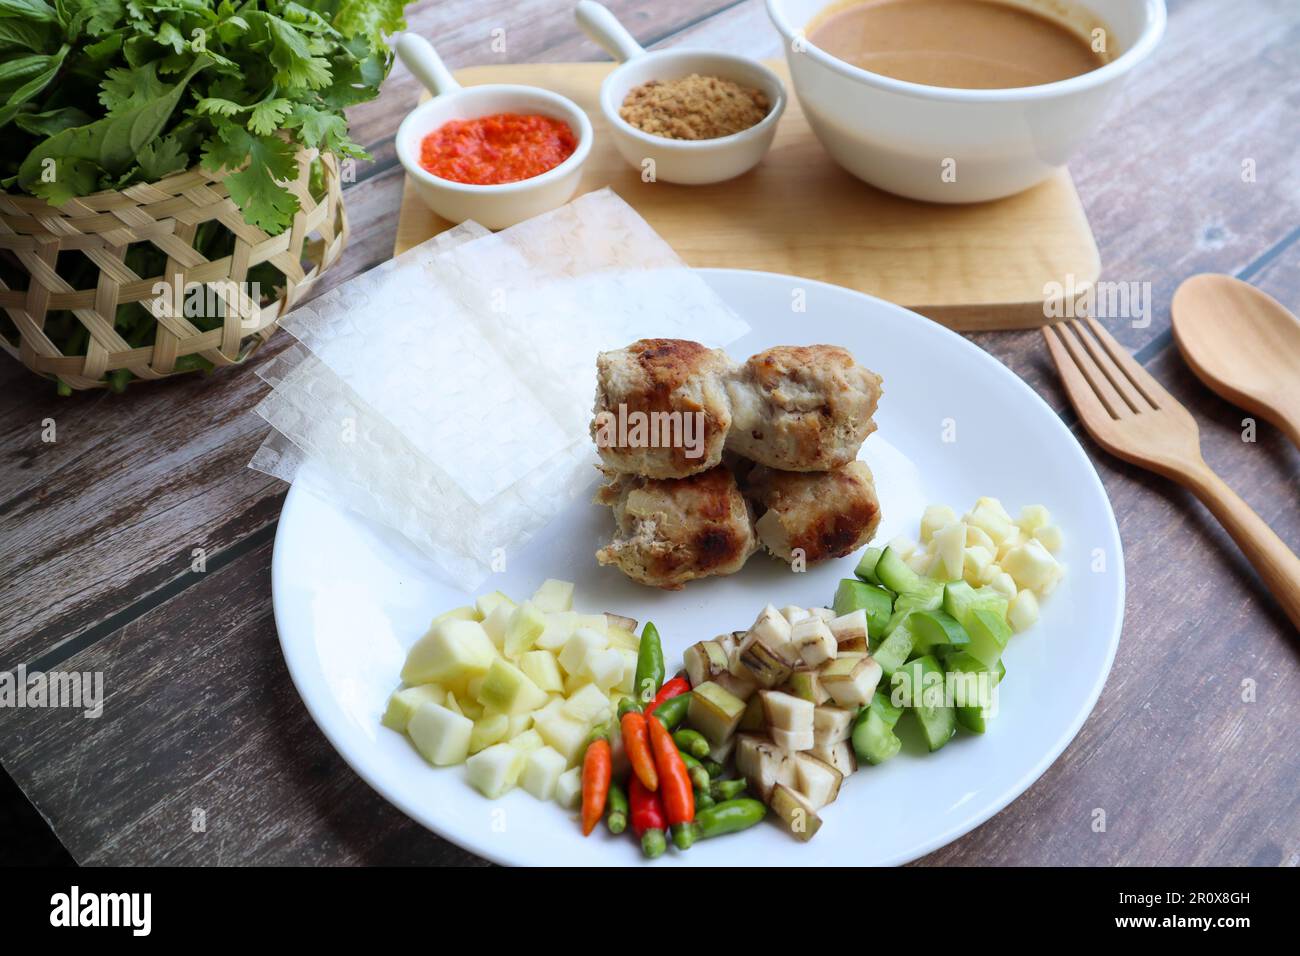 Nem Nuong - Vietnamese food of grilled pork sausage eat with rice paper and vegetables Stock Photo